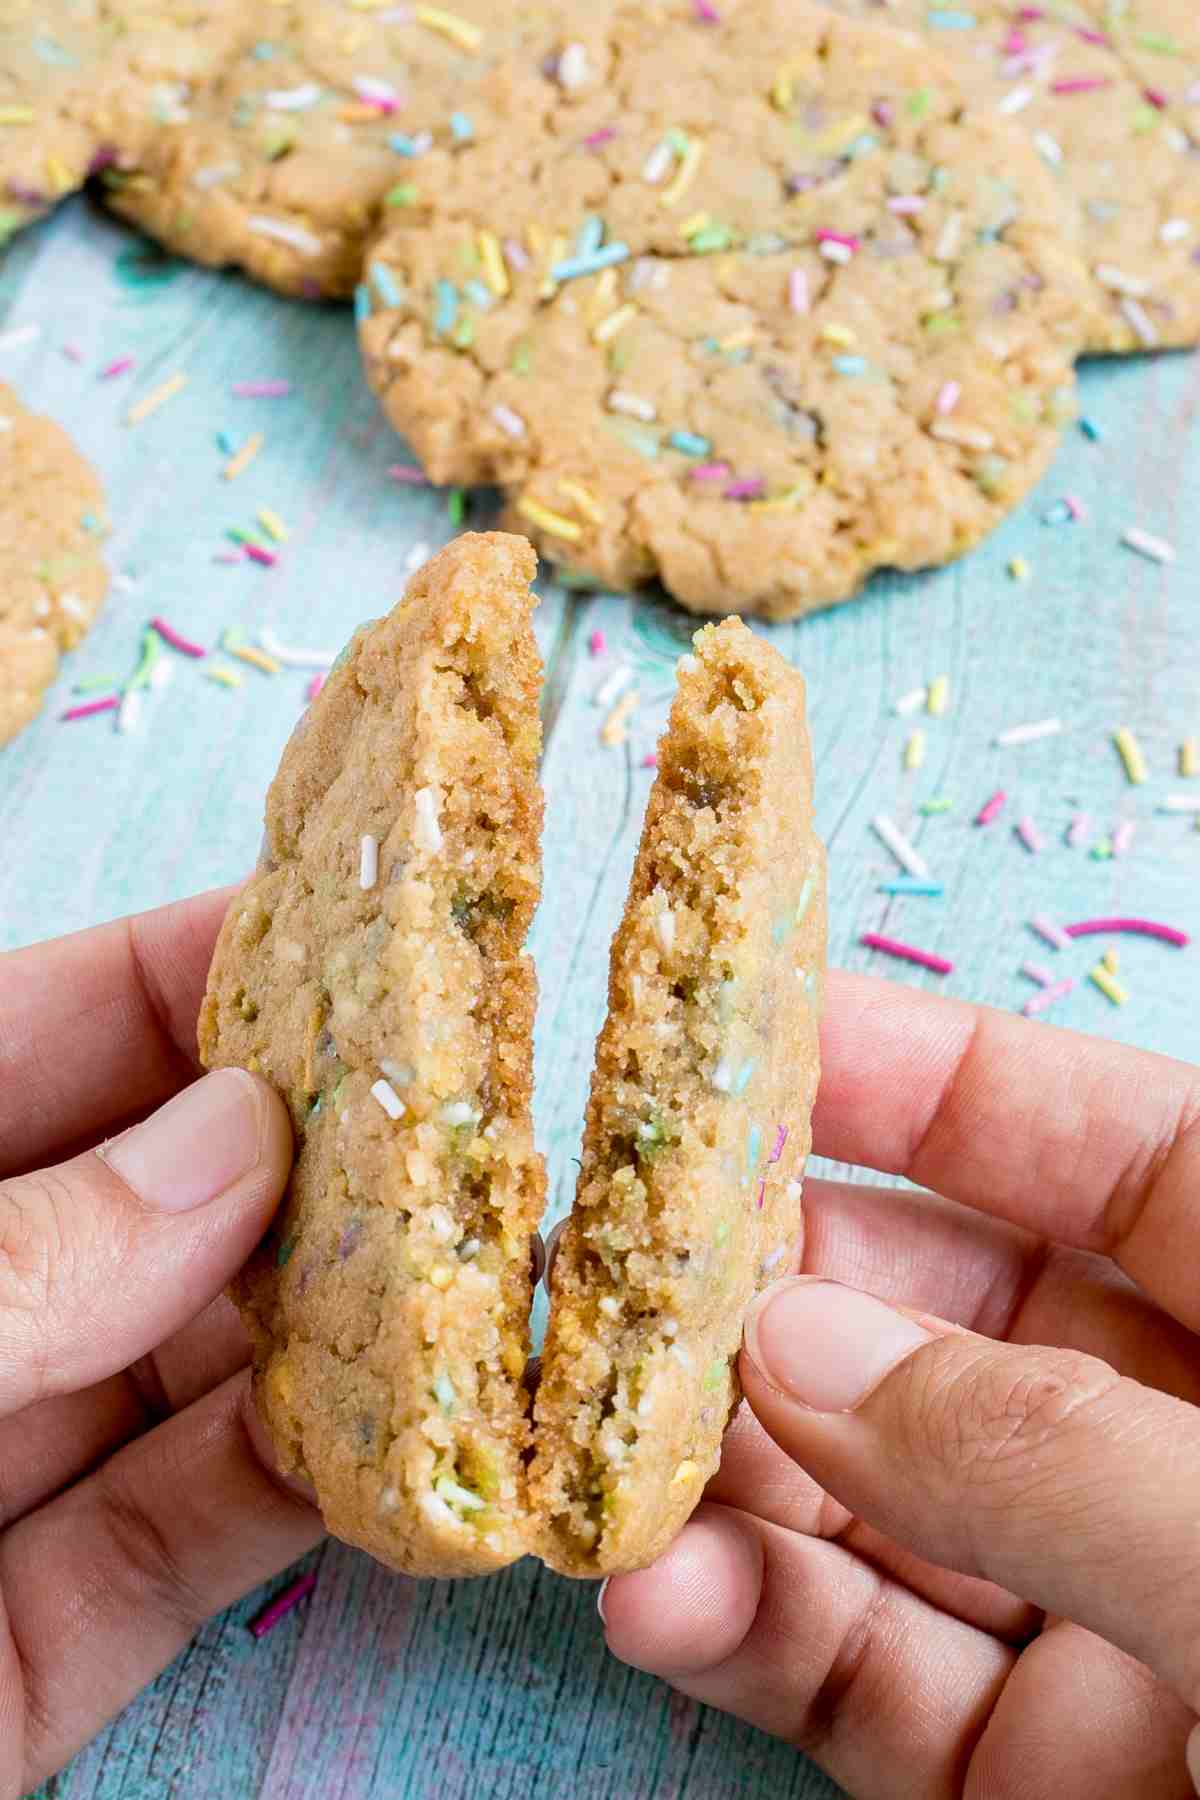 A hand is breaking a light brown cookie with rainbow sprinkles in half to show the inner texture. More cookies are behind it.